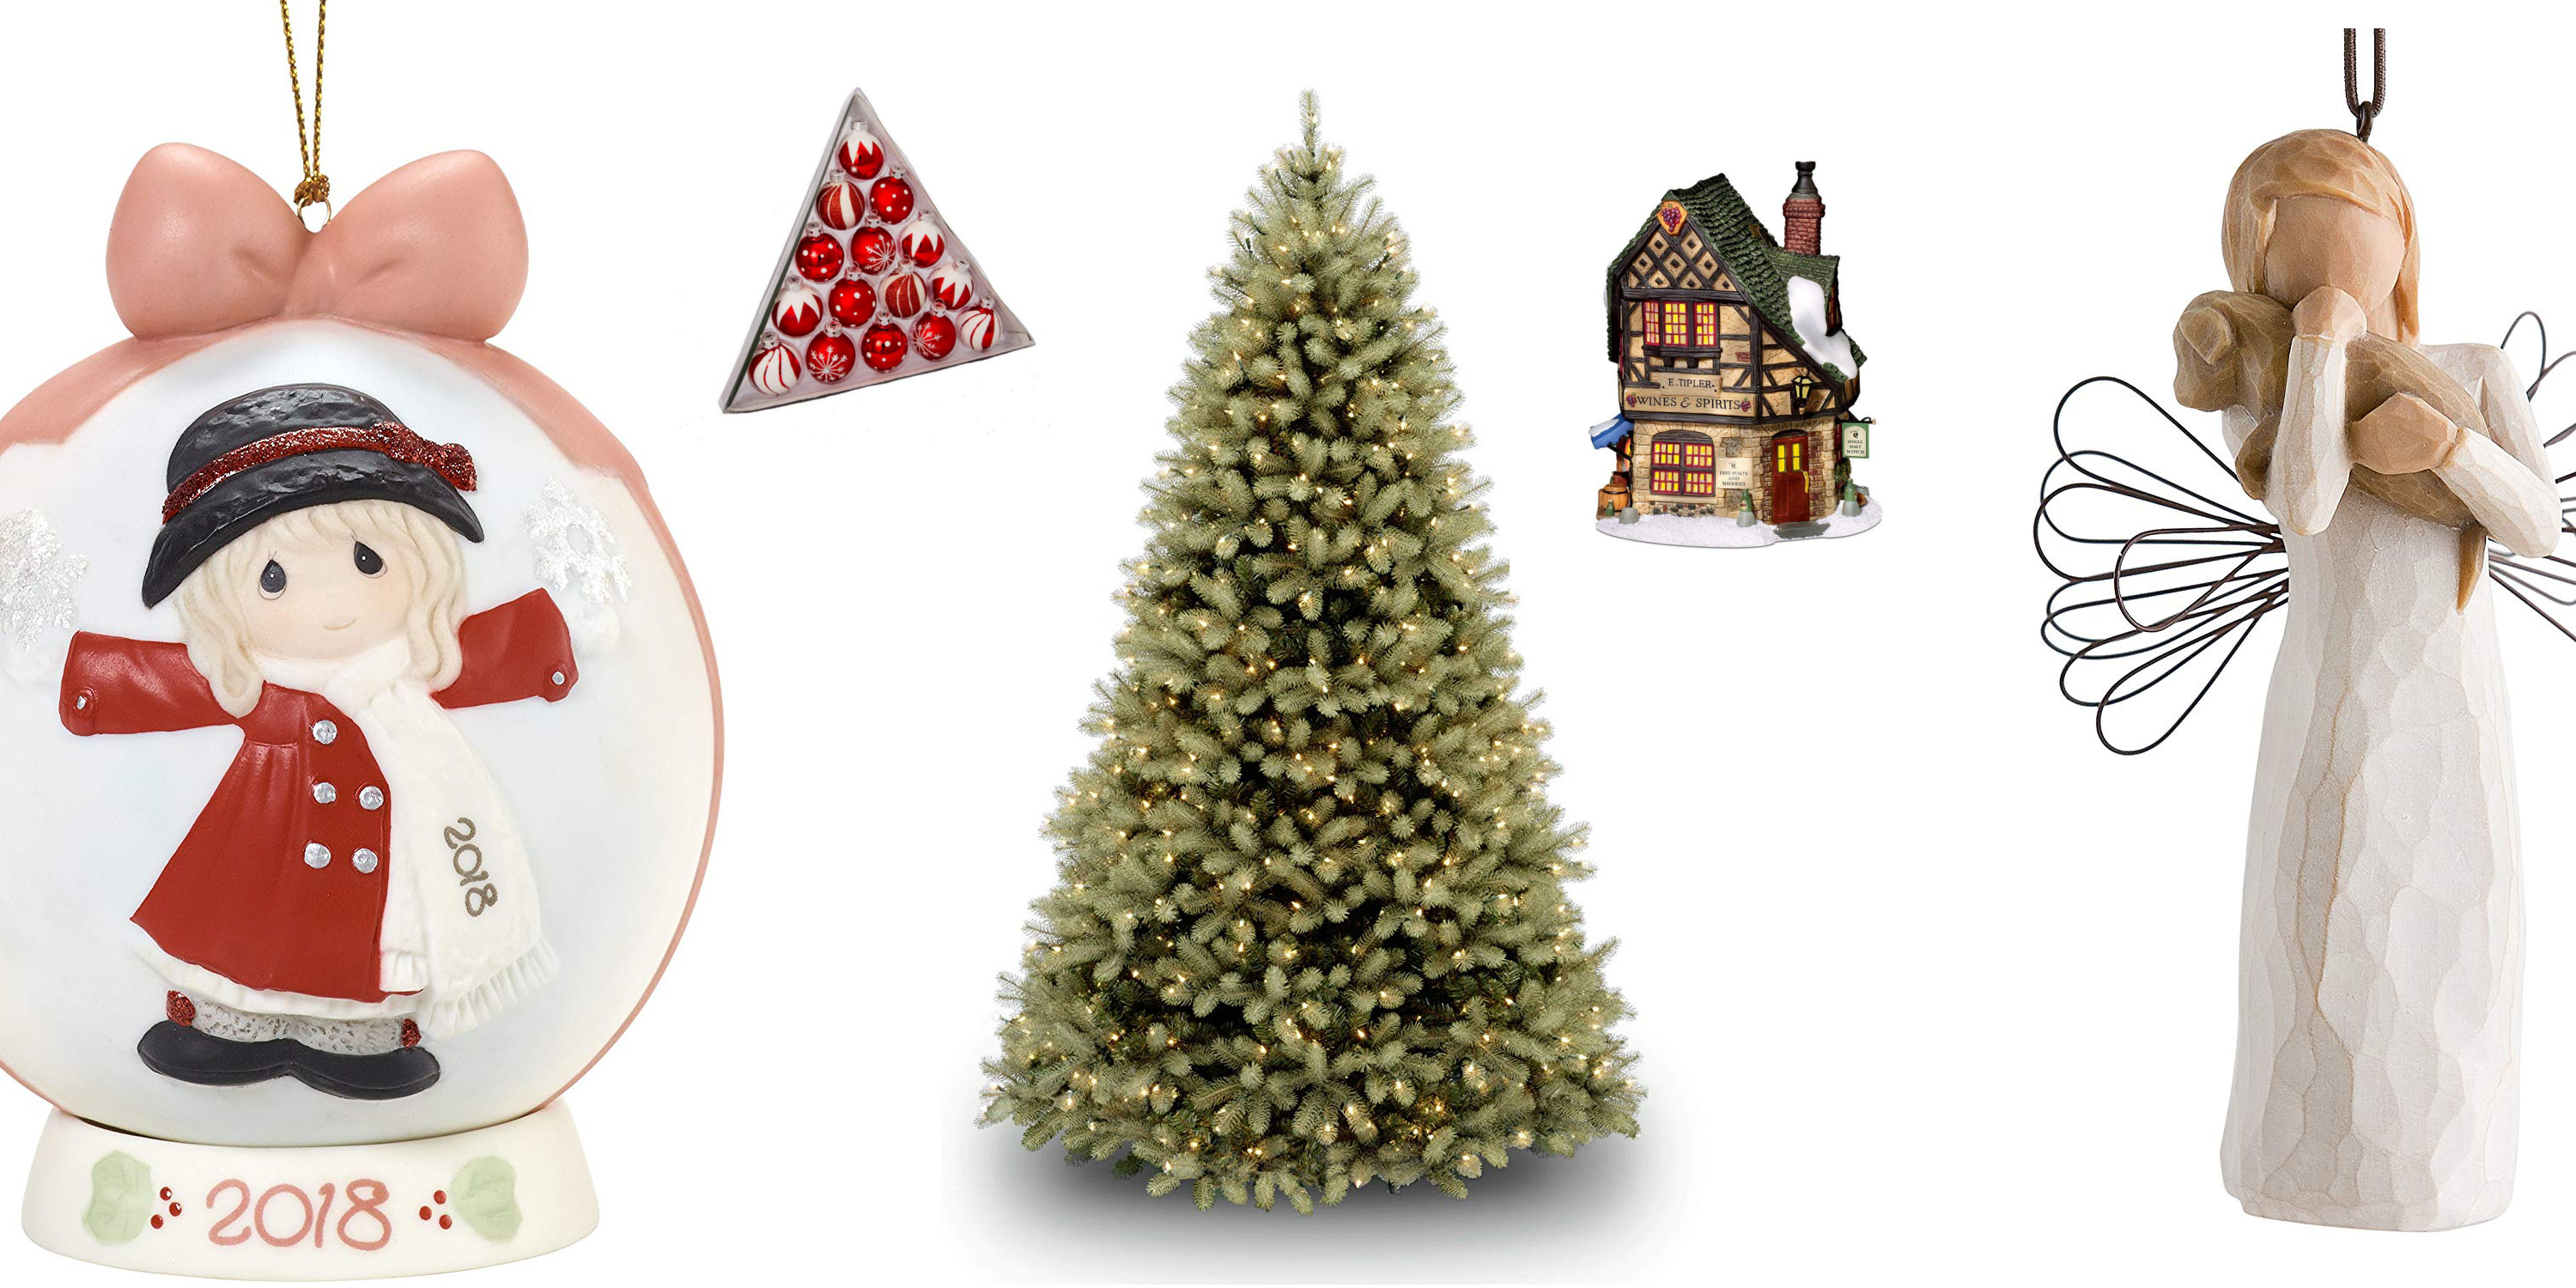 amazon-offers-up-to-50-off-holiday-decor-from-7-trees-ornaments